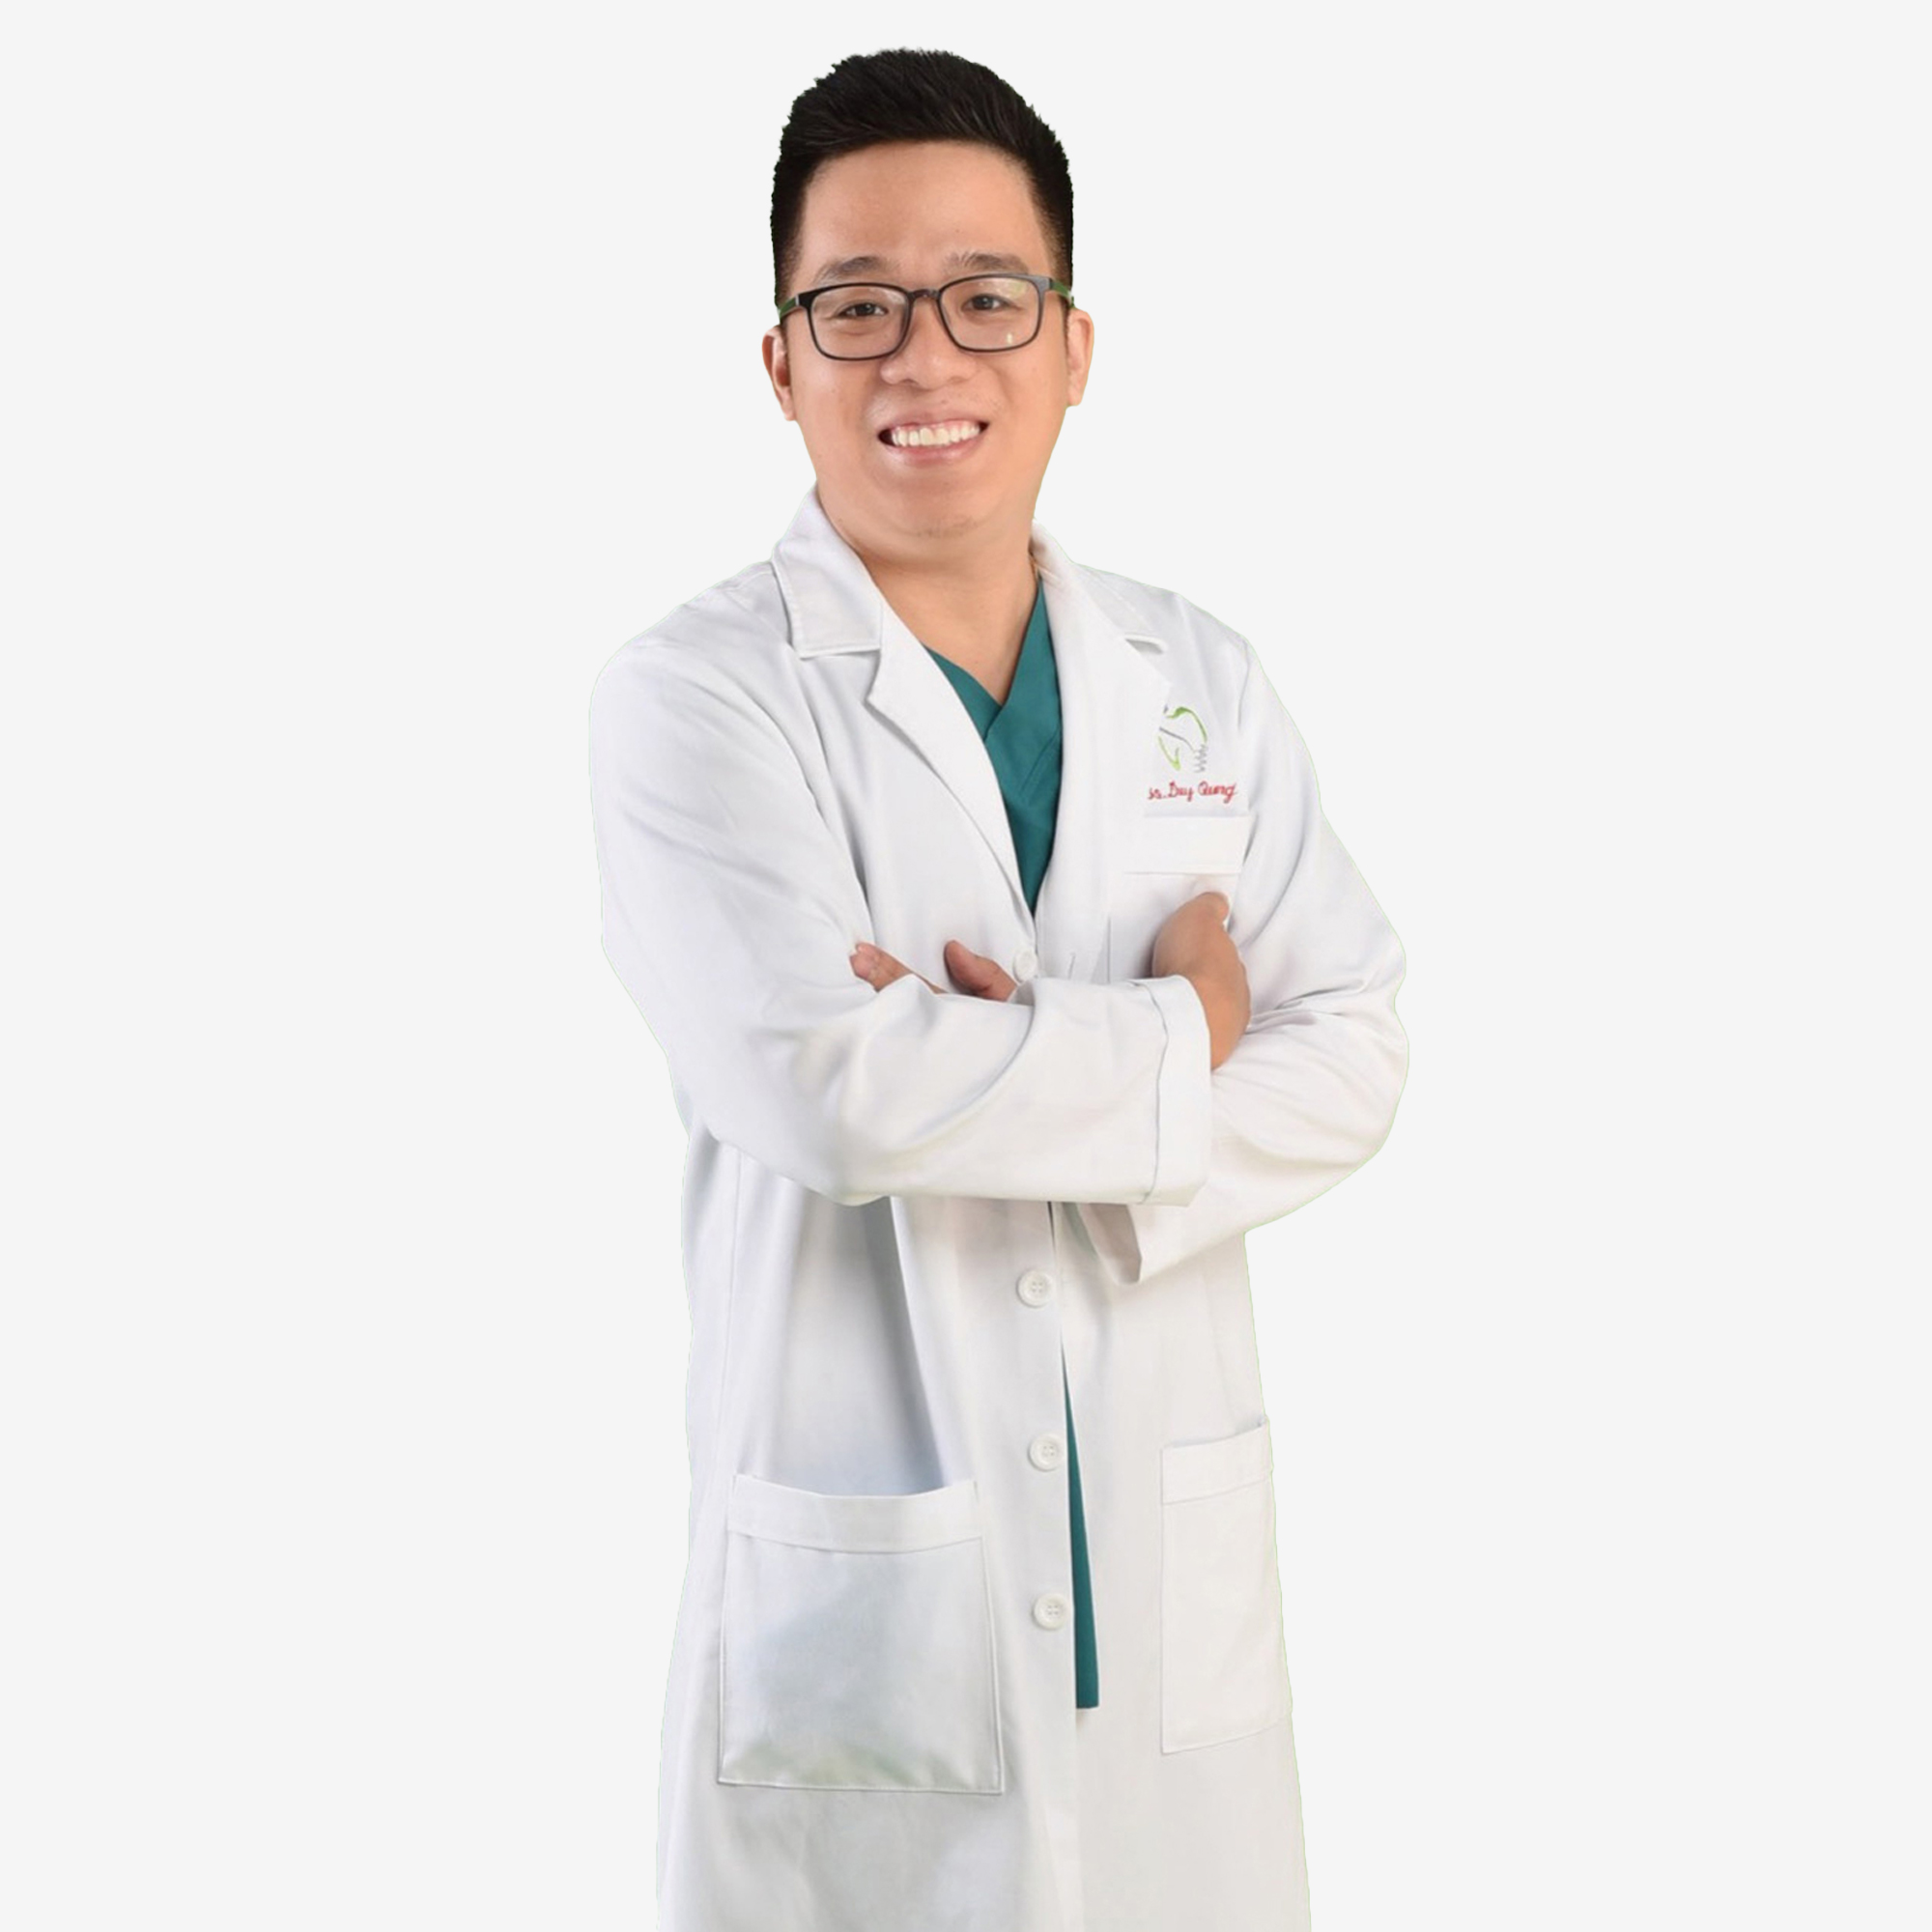 DR. NGUYEN DUY QUANG